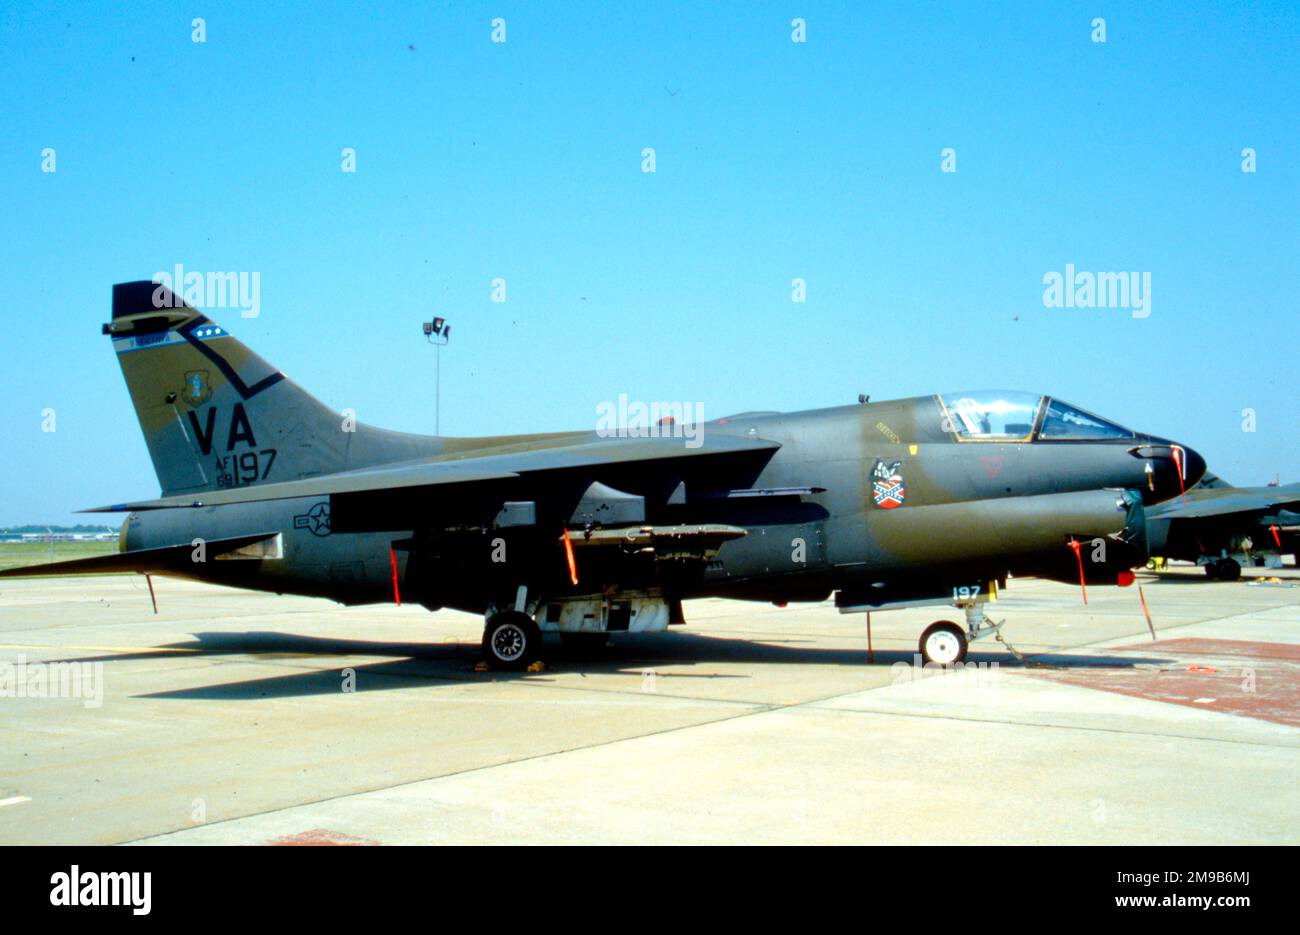 United States Air Force (USAF) - Ling-Temco-Vought A-7D-4-CV Corsair II 69-6197 (msn D-027), of the 149th Tactical Fighter Squadron, Virginia Air National Guard. Stock Photo